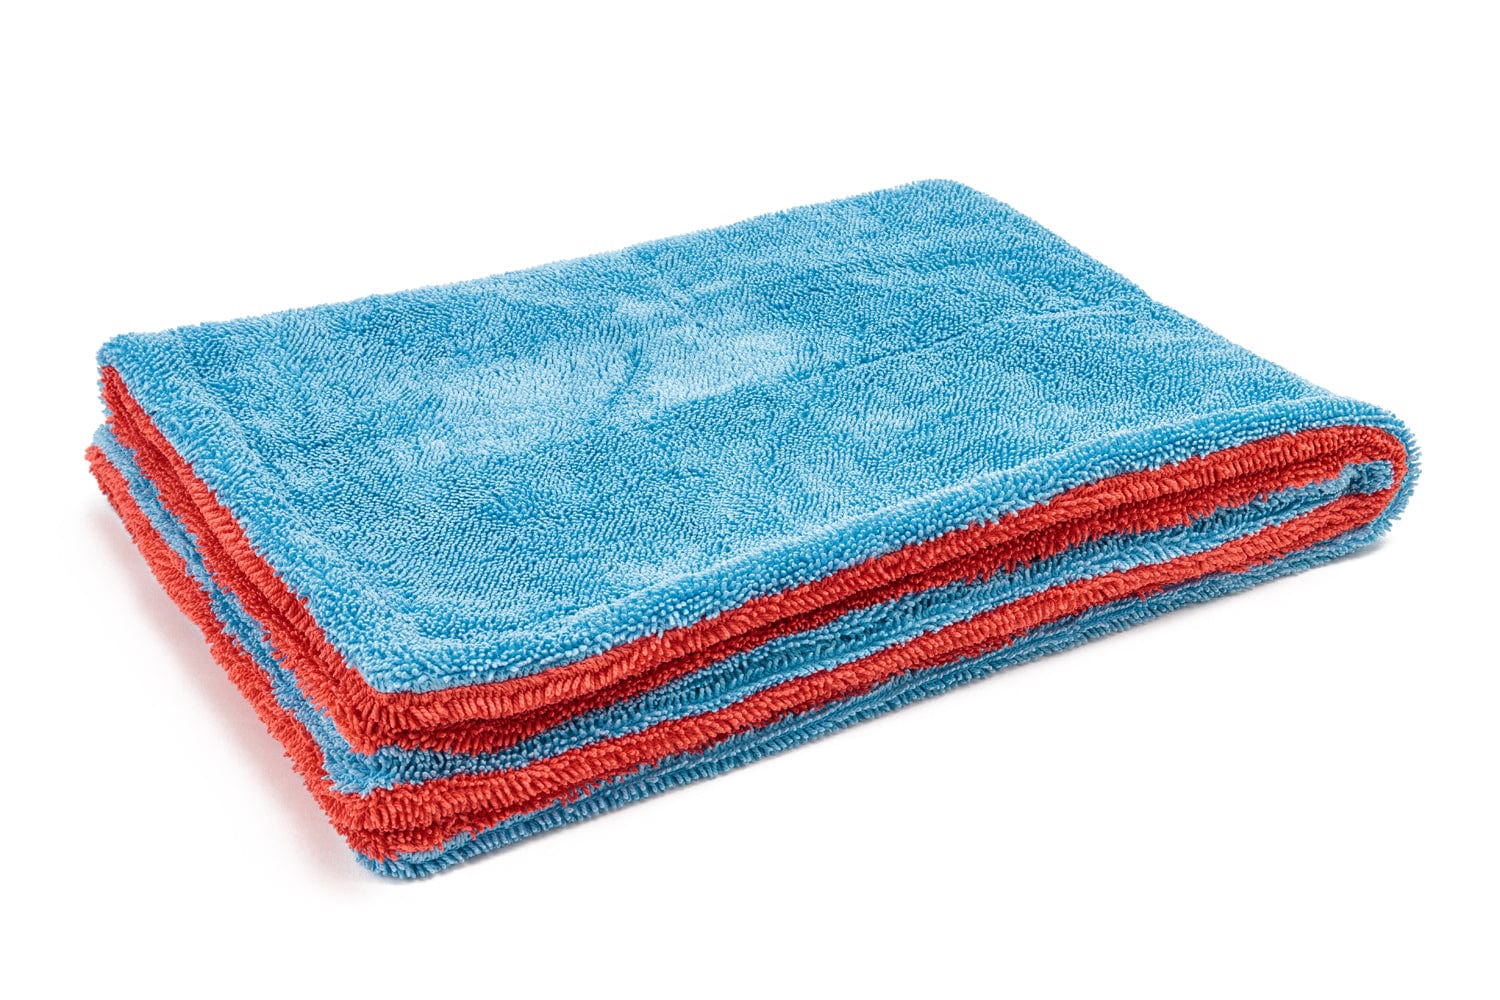 Autofiber Bulk Towel Blue/Red FULL CASE Dreadnought MAX - Triple Layer Microfiber Twist Pile Drying Towel (20 in. x 30 in., 1400gsm) - 26/case